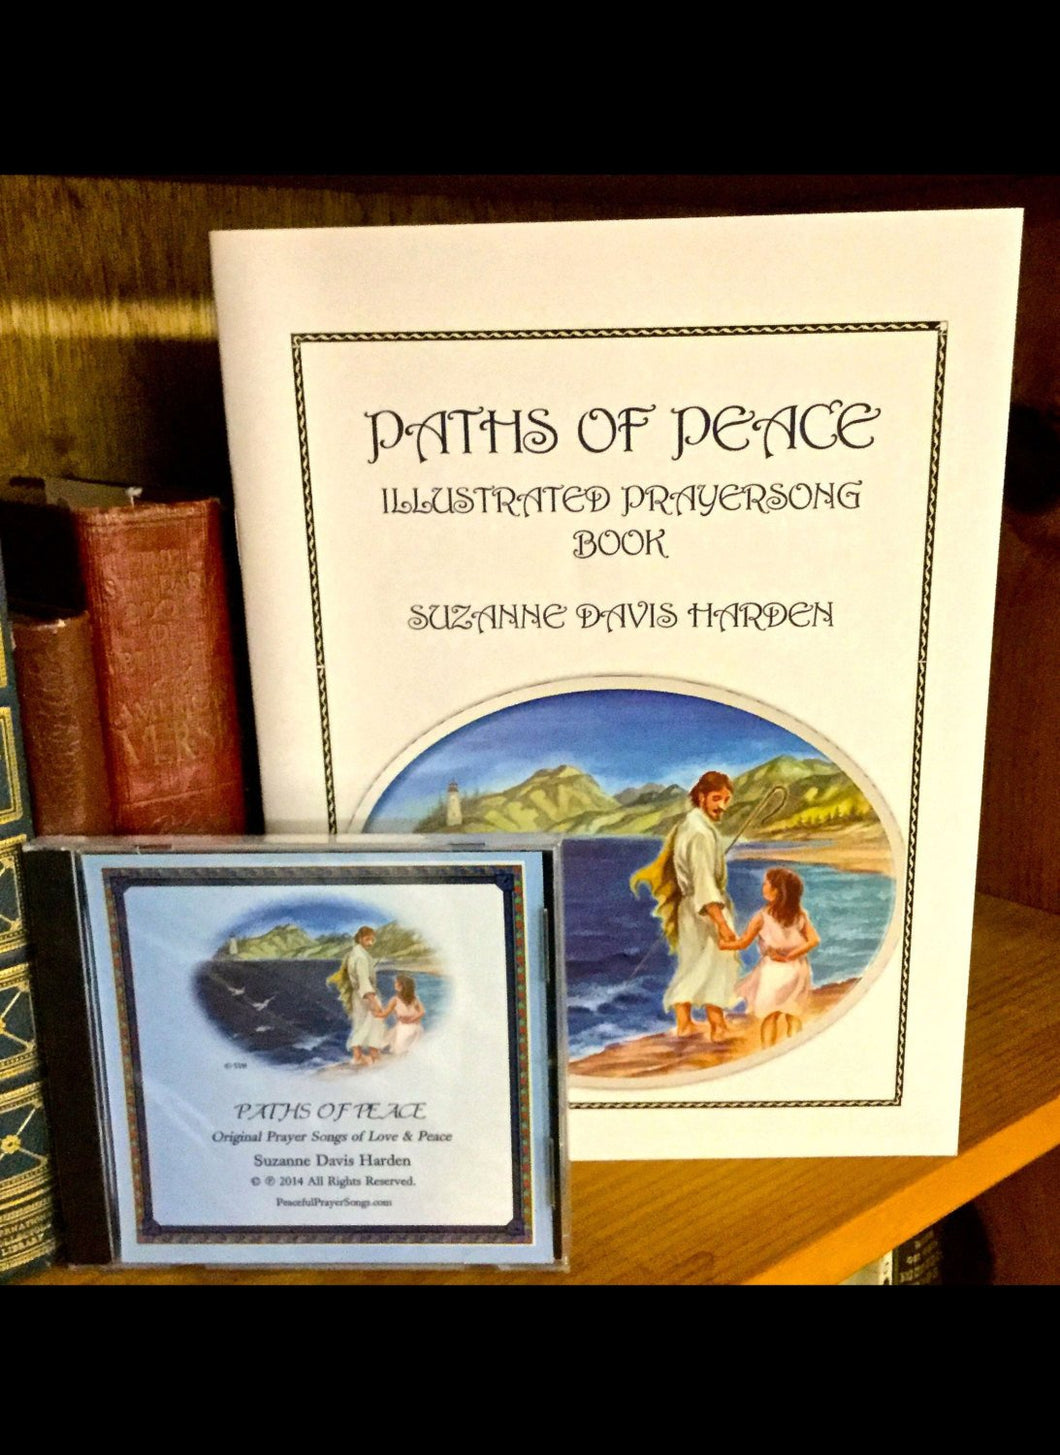 Book Set A-Paths of Peace Music & CD Gift Set Illustrated Prayersong Book & Album by Suzanne Davis Harden